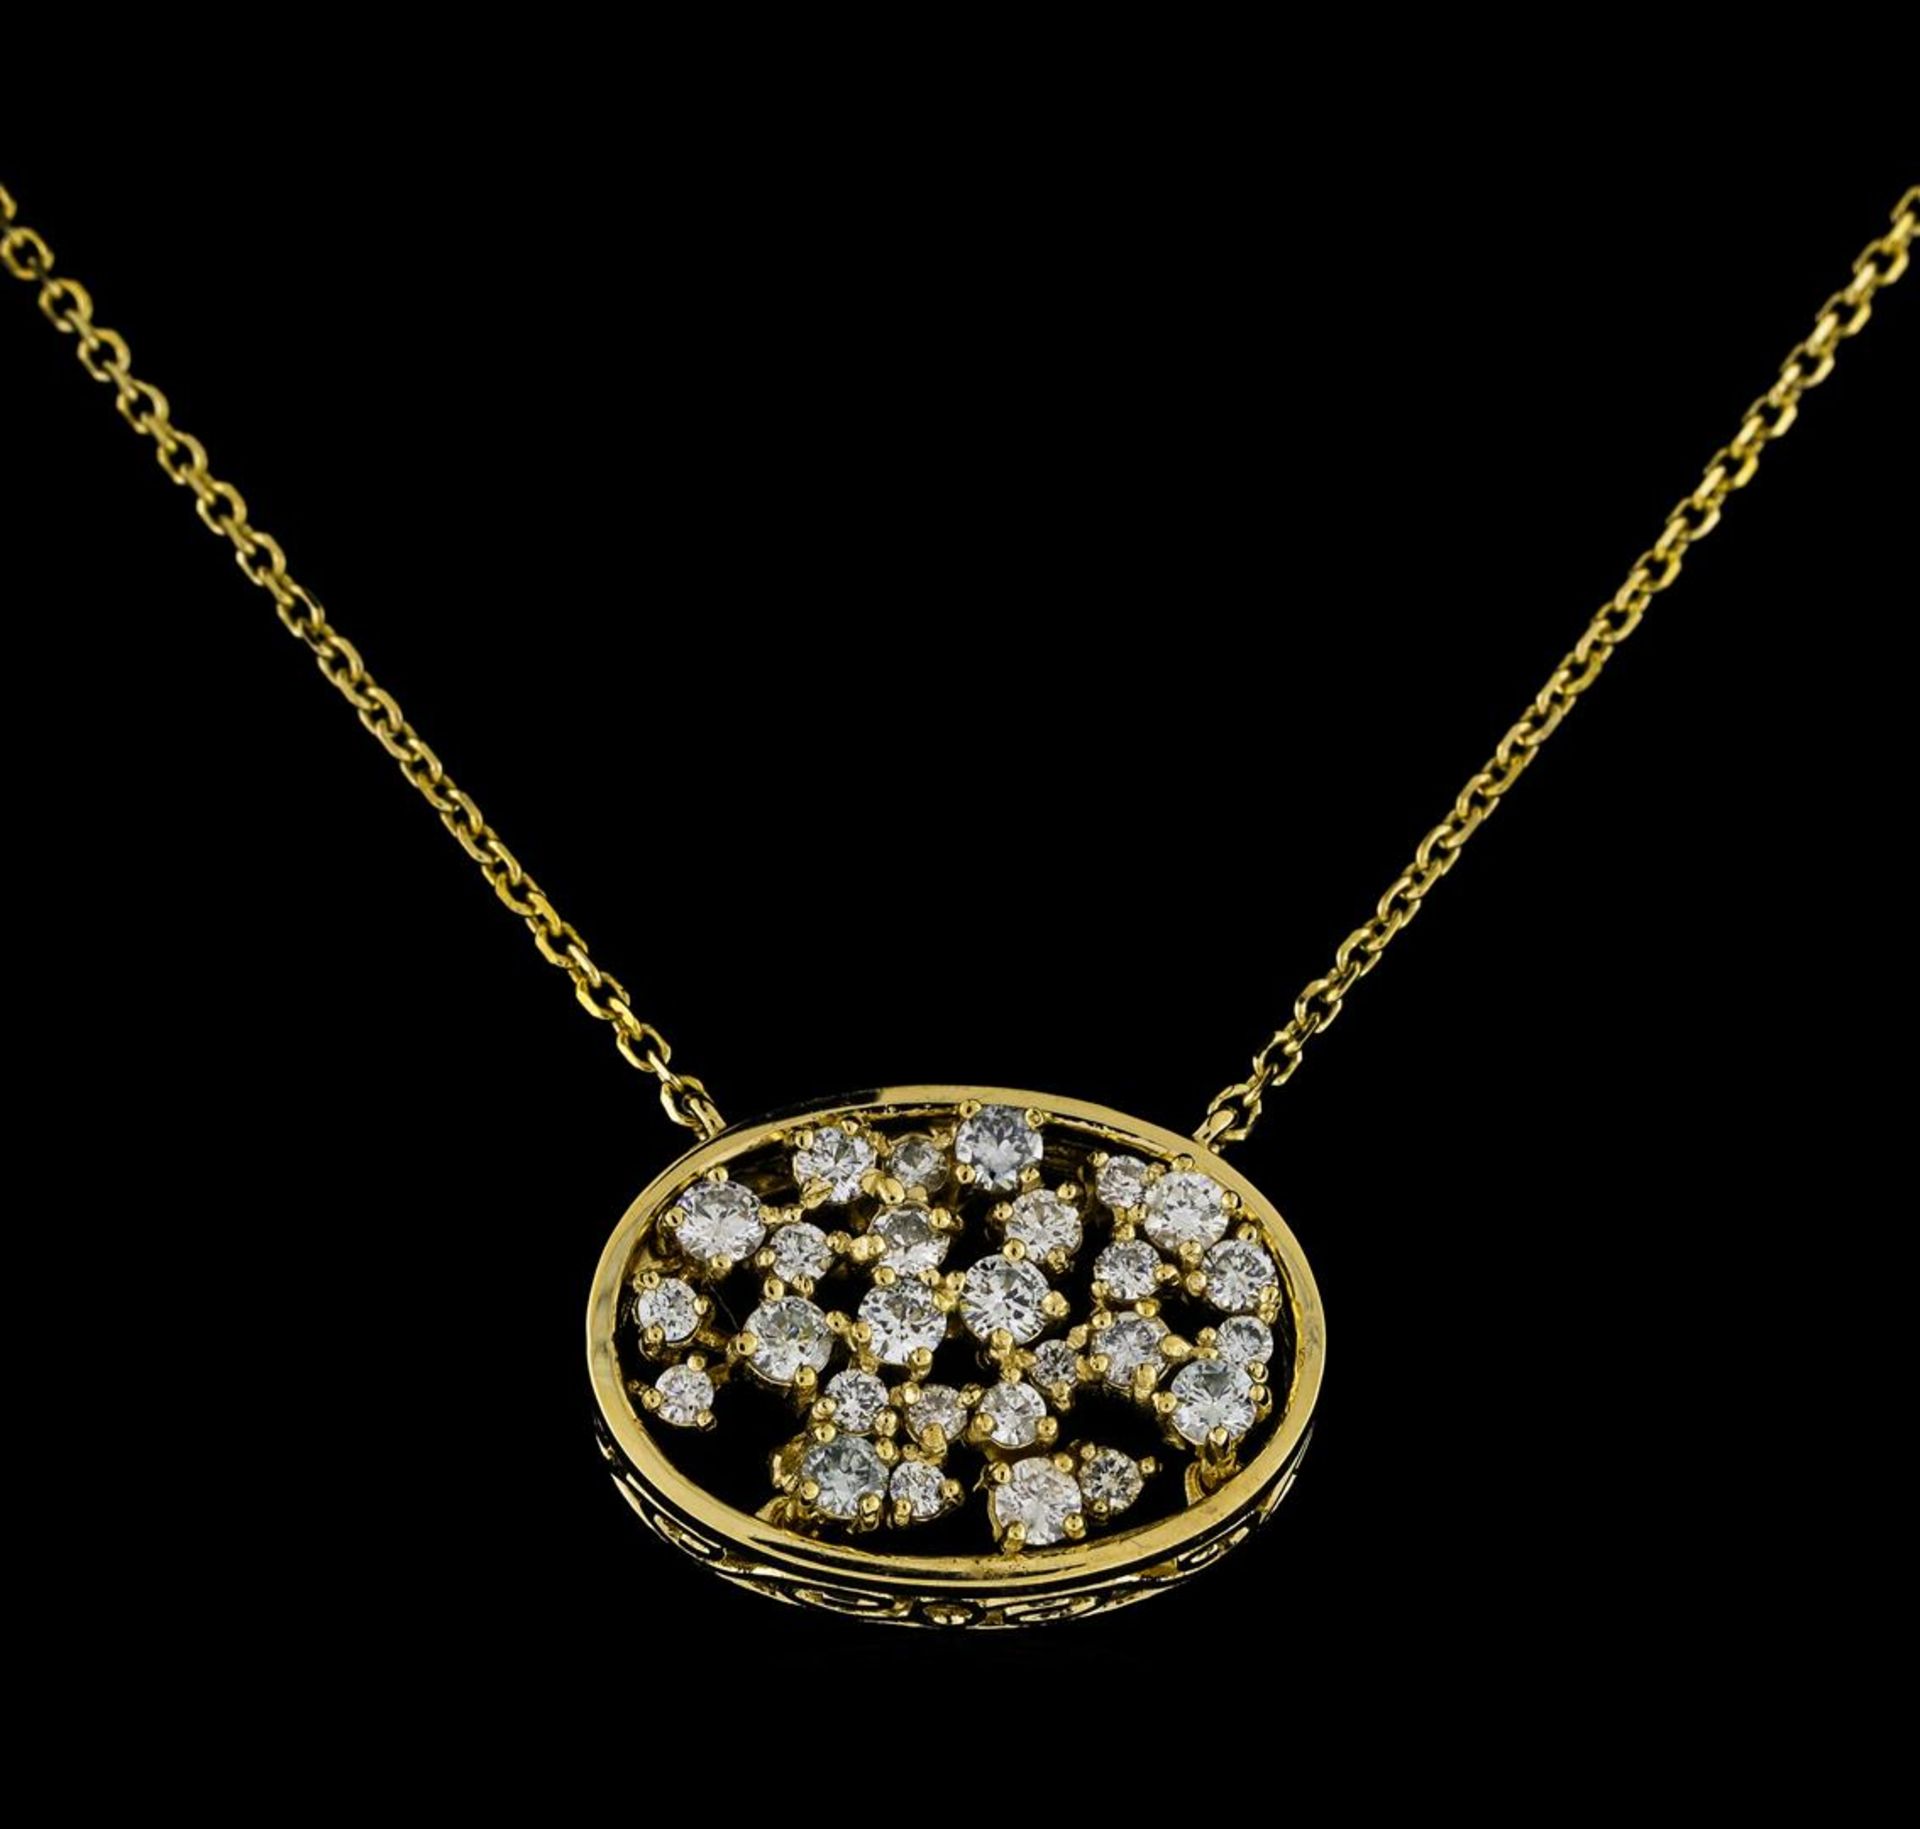 0.67 ctw Diamond Necklace - 14KT Yellow Gold - Image 2 of 2